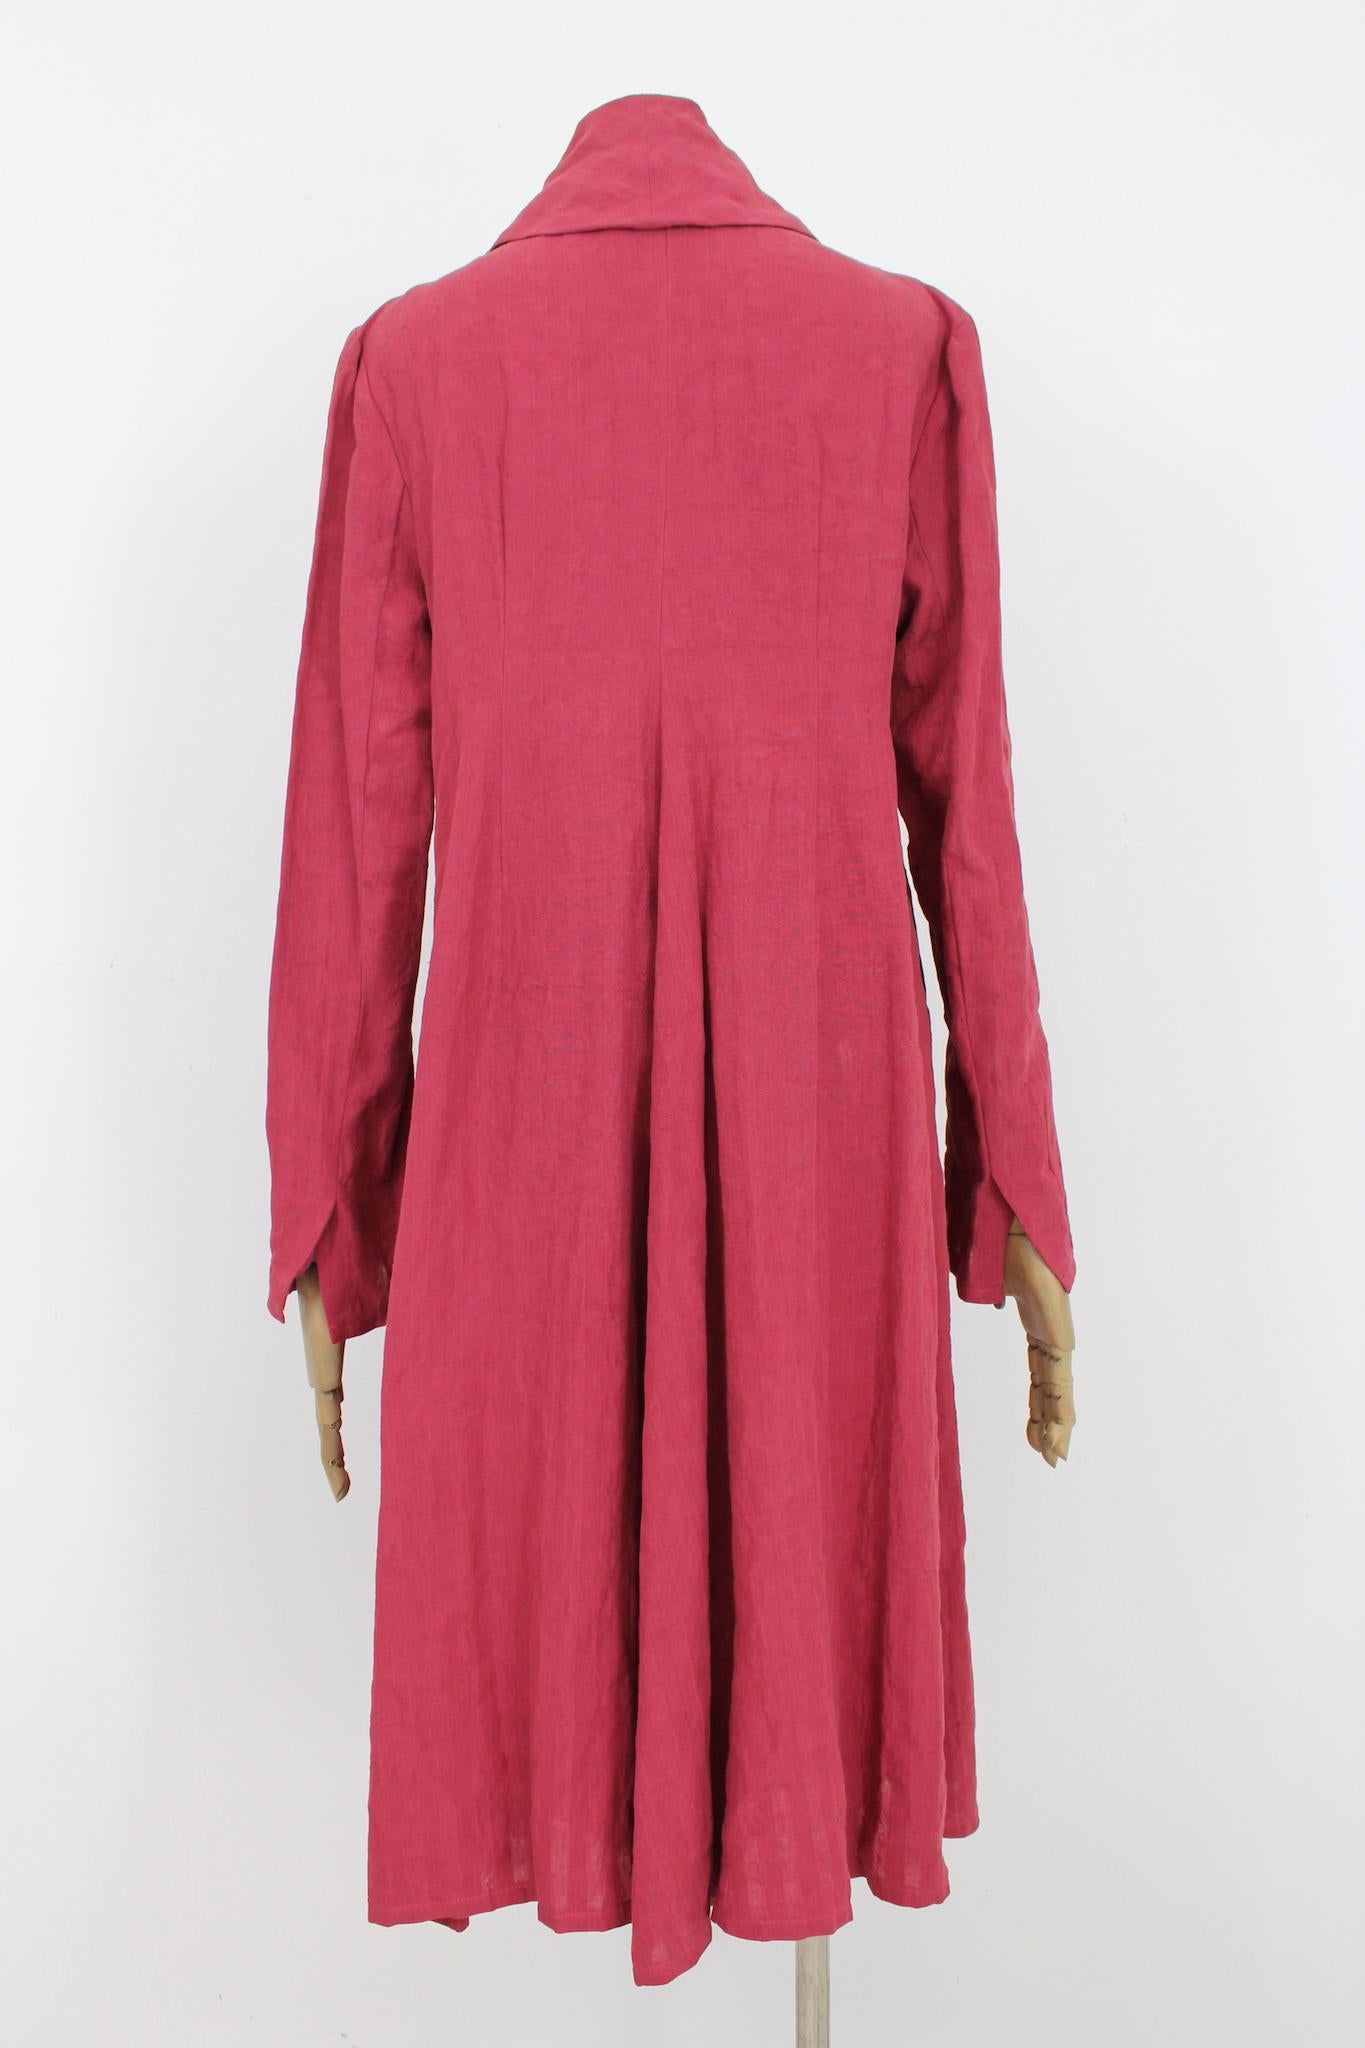 Marcel Marongiu 90s vintage long shirt dress. Red color, 100% linen fabric. Buttons closure along the length, two pockets on the hips. Made in France.

Size: 46 It 12 Us 14 Uk

Shoulder: 46 cm
Bust / Chest: 48 cm
Sleeve: 62 cm
Waist: 51 cm
Length: